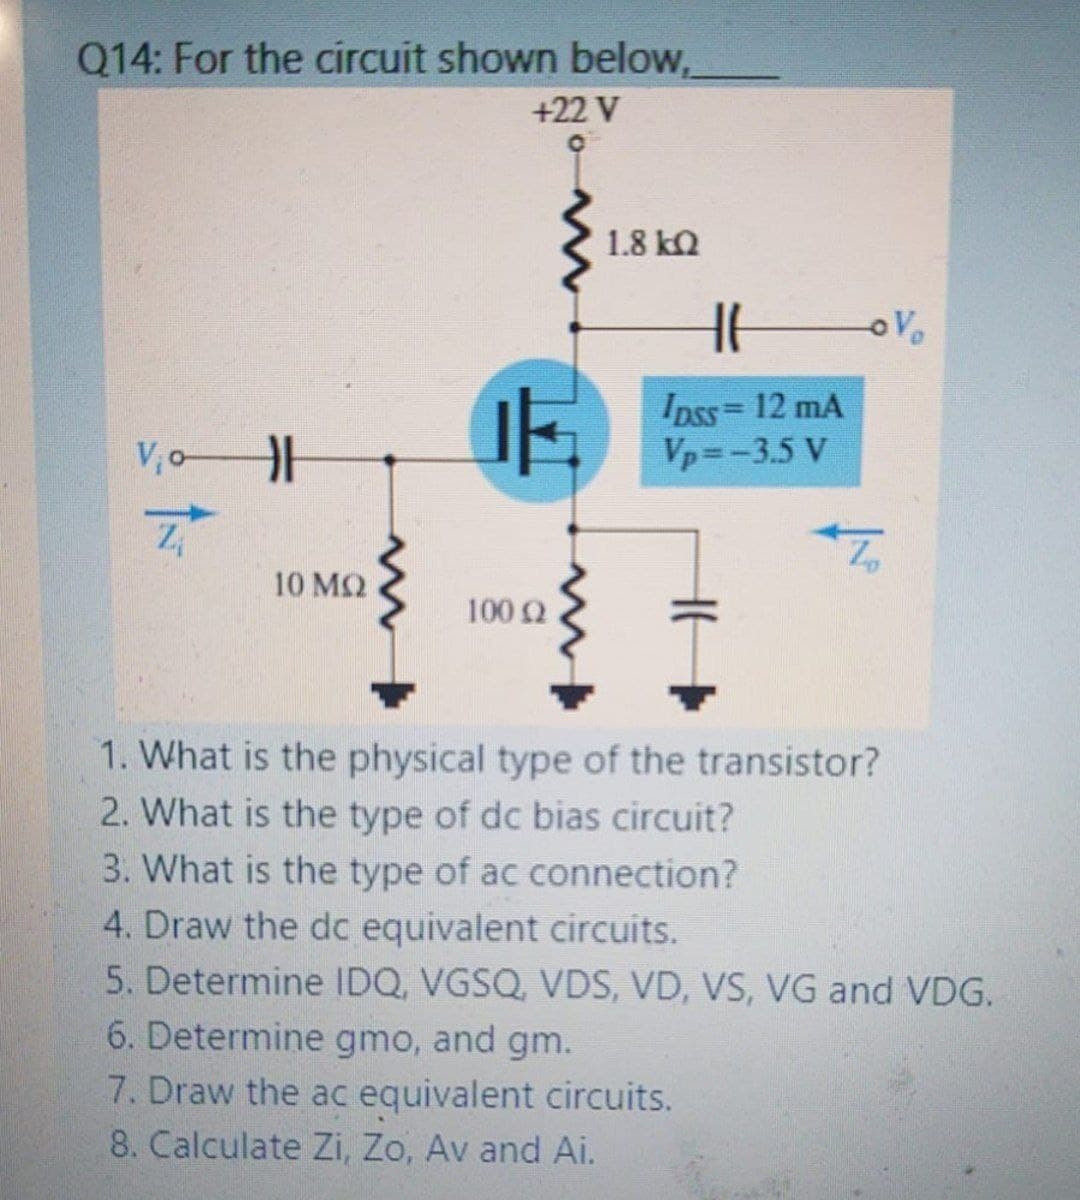 Q14: For the circuit shown below,
+22 V
1.8 kQ
Ipss= 12 mA
Vp=-3.5 V
VoH
10 MQ
100 Q
1. What is the physical type of the transistor?
2. What is the type of dc bias circuit?
3. What is the type of ac connection?
4. Draw the dc equivalent circuits.
5. Determine IDQ, VGSQ, VDS, VD, VS, VG and VDG.
6. Determine gmo, and gm.
7. Draw the ac equivalent circuits.
8. Calculate Zi, Zo, Av and Ai.
